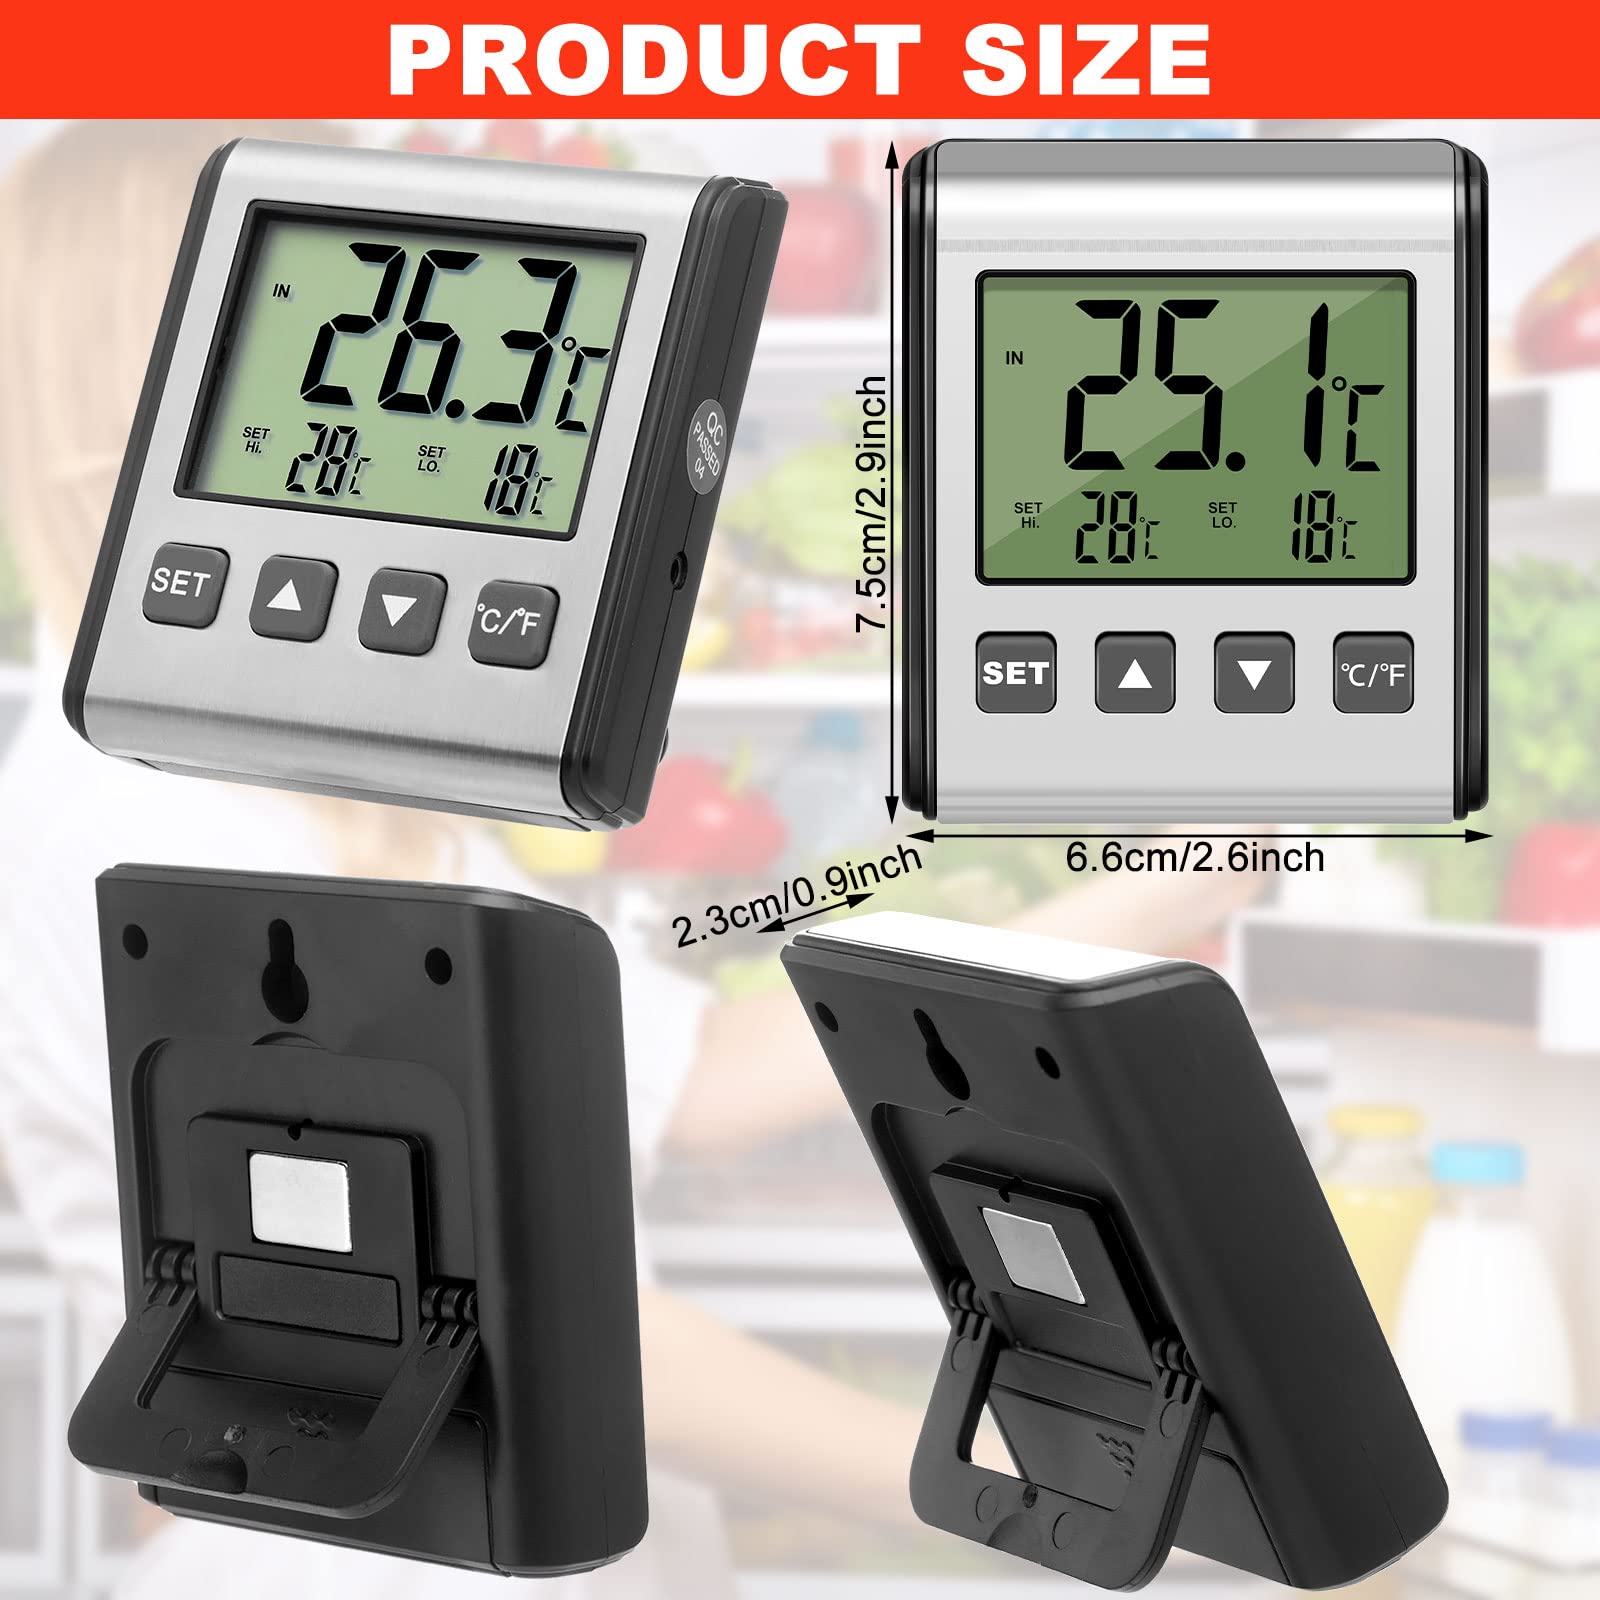 2 Pieces Digital Refrigerator Thermometer Freezer Thermometer Stainless Panel Thermometer High and Low Freezer Temperature Alarm with Sensor Magnet Probe LCD for Fridge Room kitchen